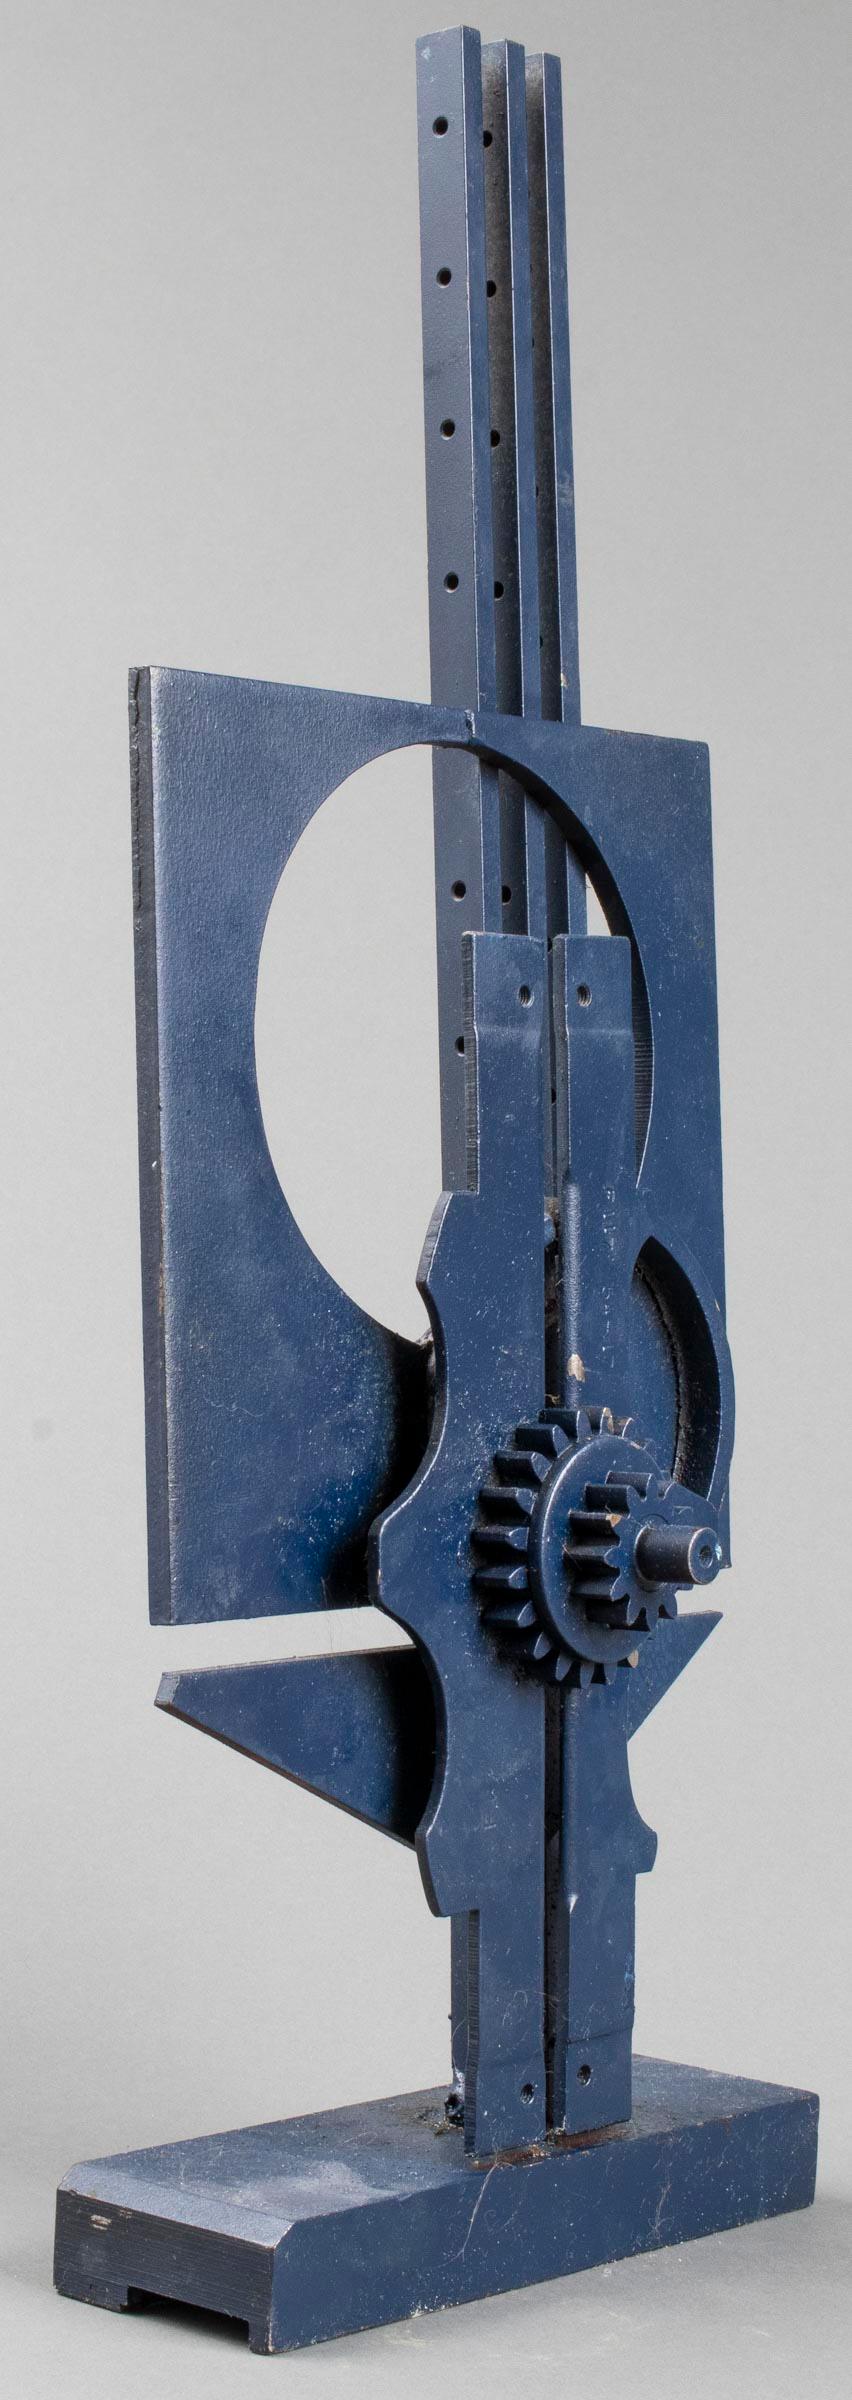 Modern steel sculpture painted in monochrome blue, industrial form with bars and gears, possibly depicting two stylized figures, marked: 